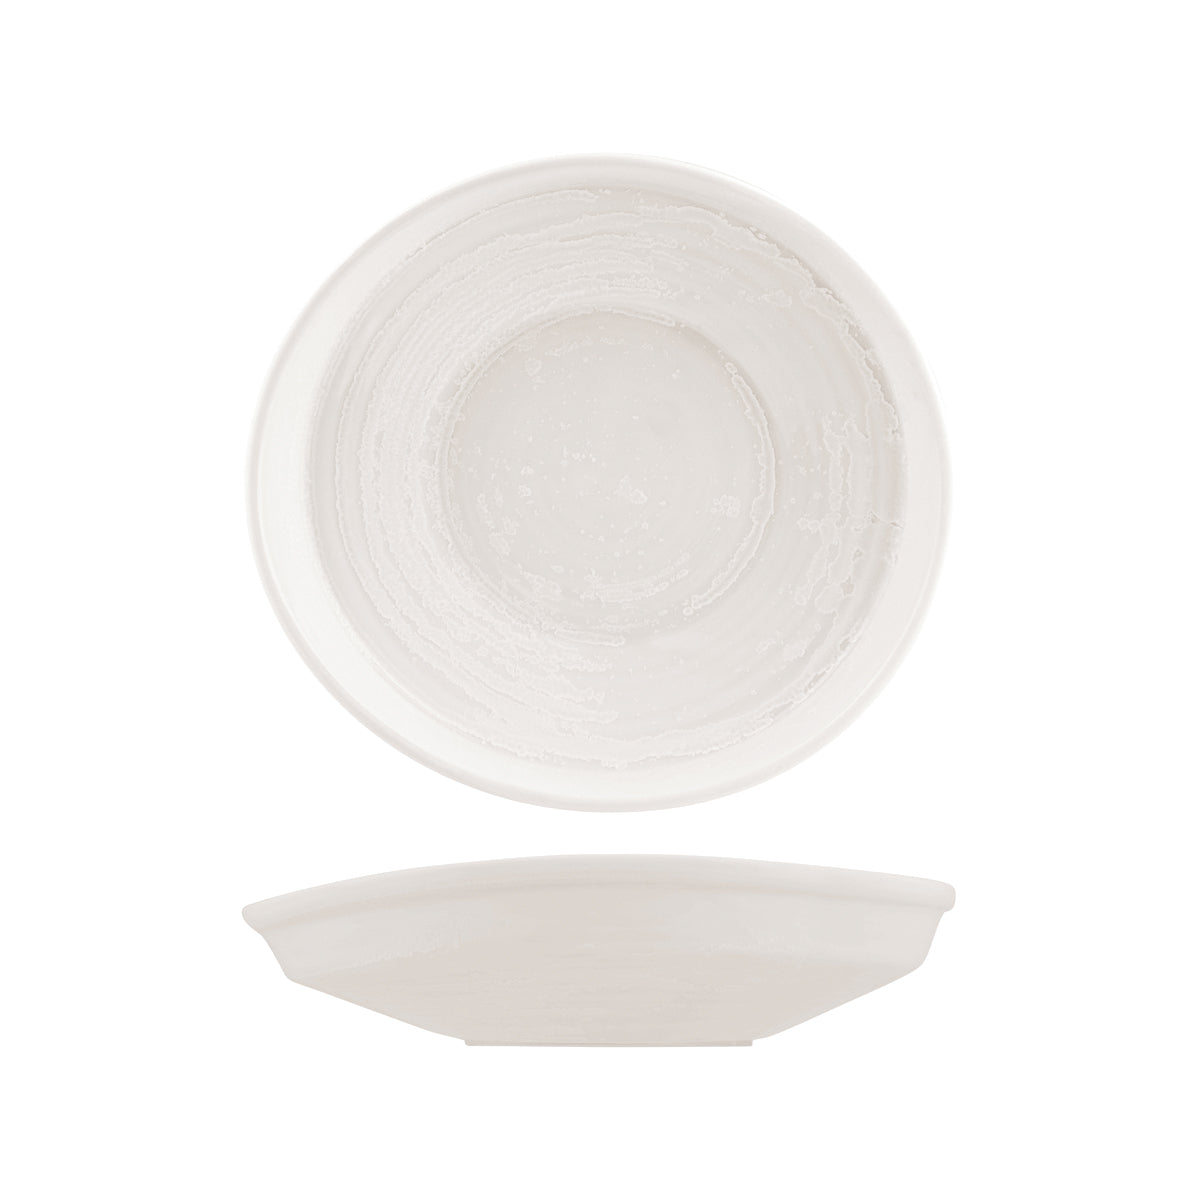 Organic shaped plate - 255x235mm, Snow, Moda Porcelain from Moda Porcelain. made out of Porcelain and sold in boxes of 6. Hospitality quality at wholesale price with The Flying Fork! 